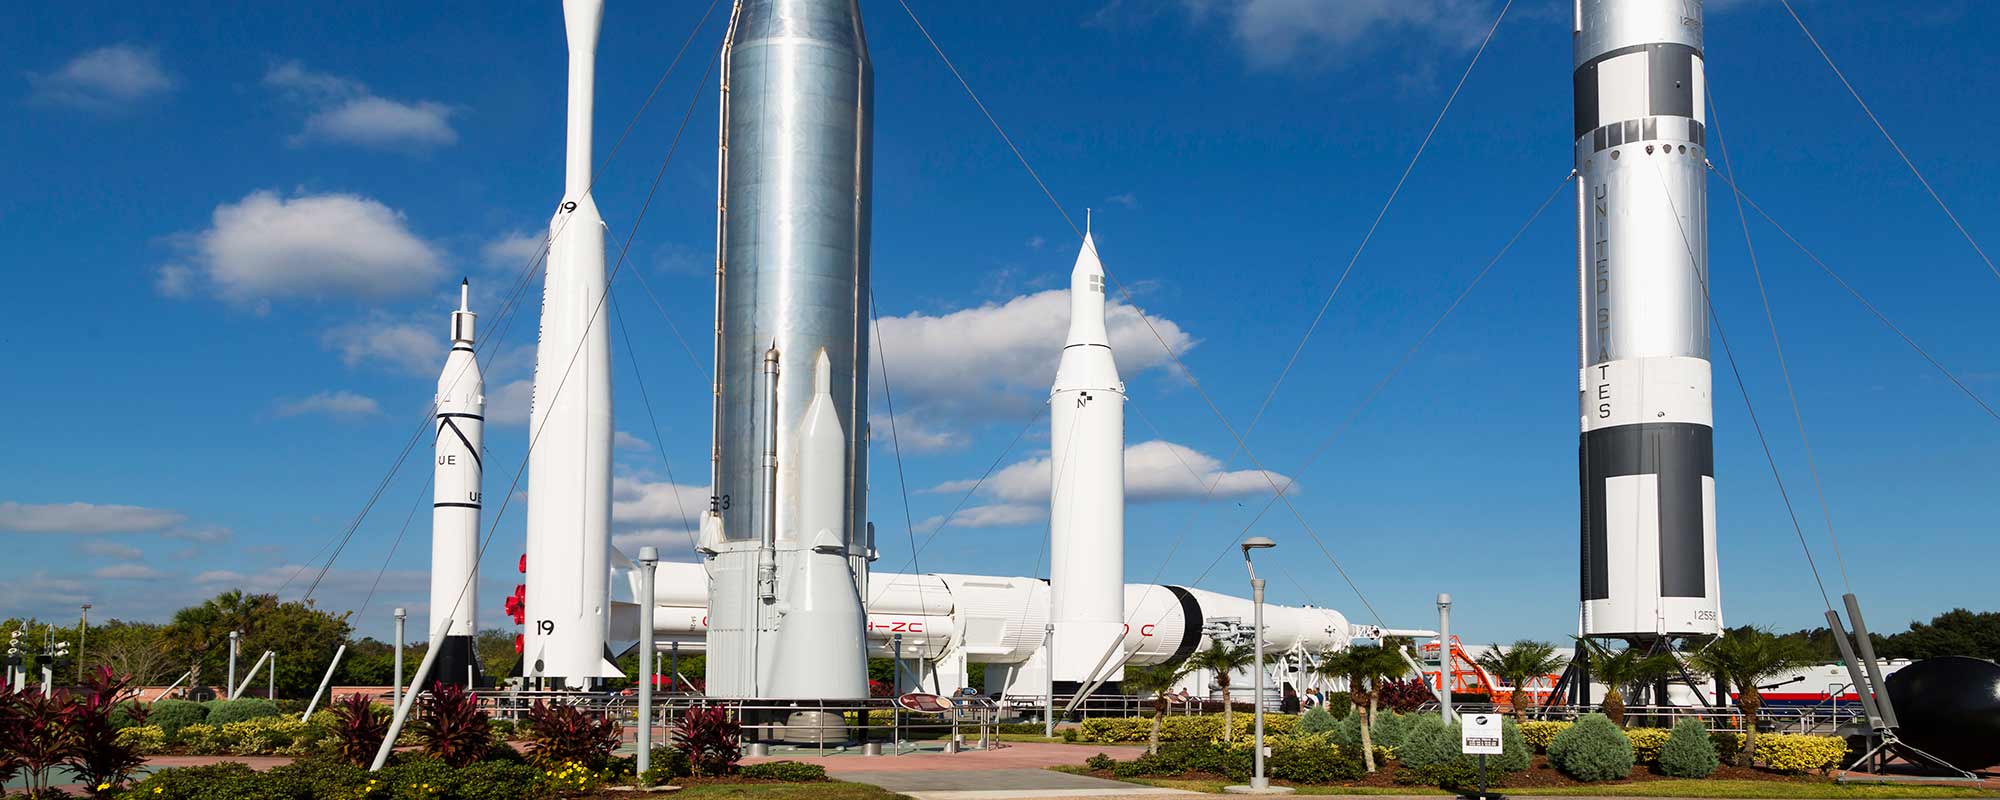 Rocket Center Garden on Kennedy Space Center Class Trip with Educational Tours